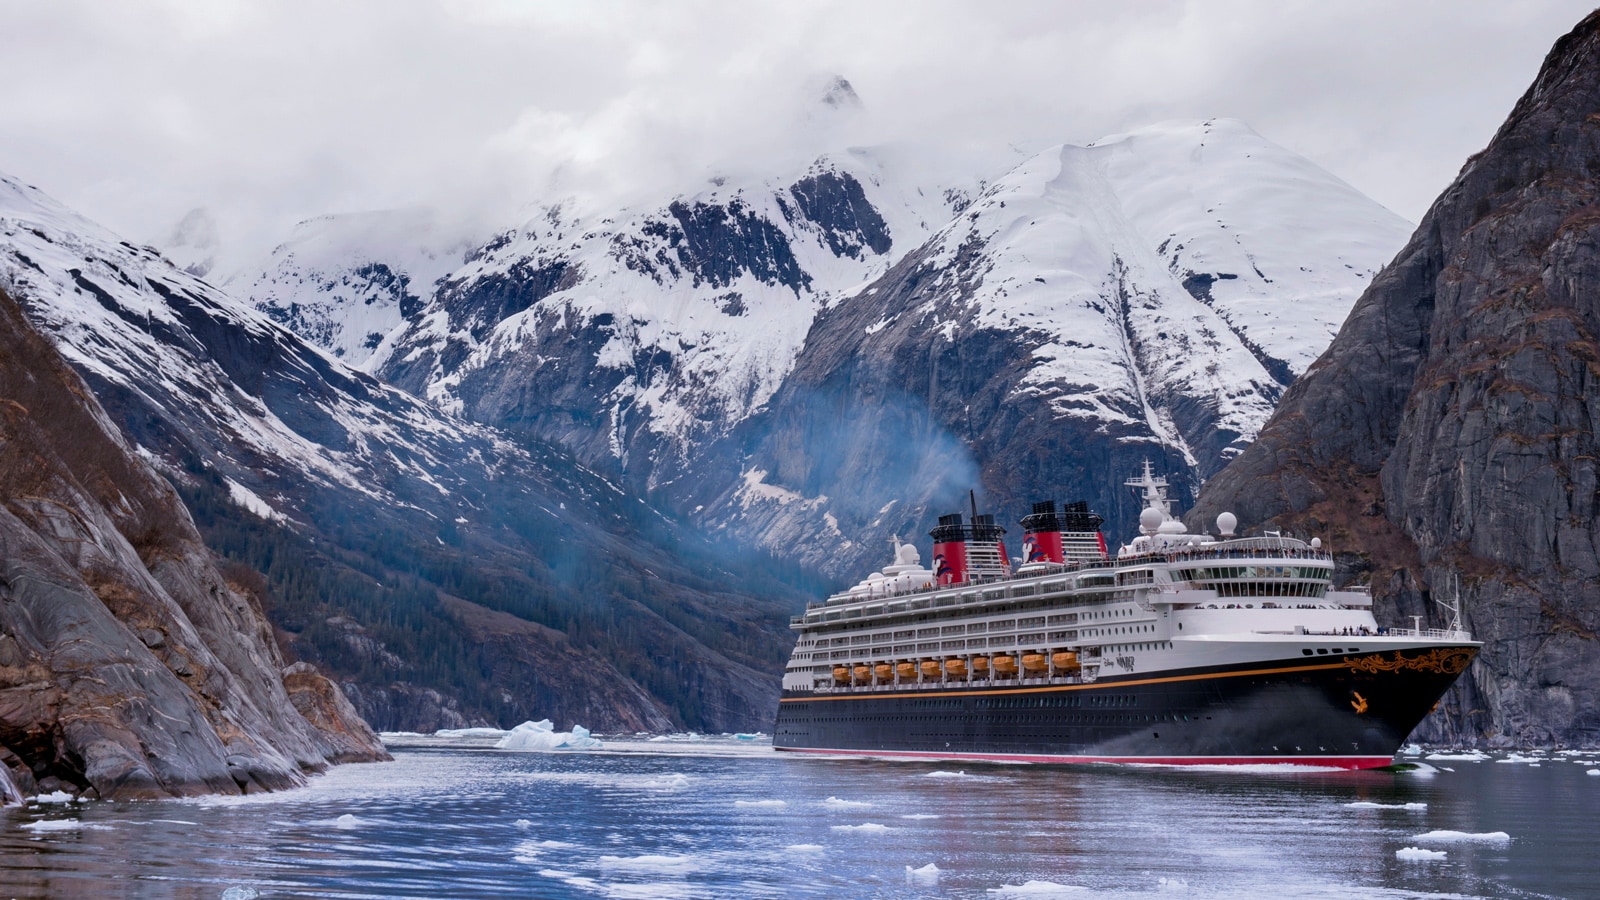 Disney Cruise Line Offer Save 35 on Select Sailings in 2021